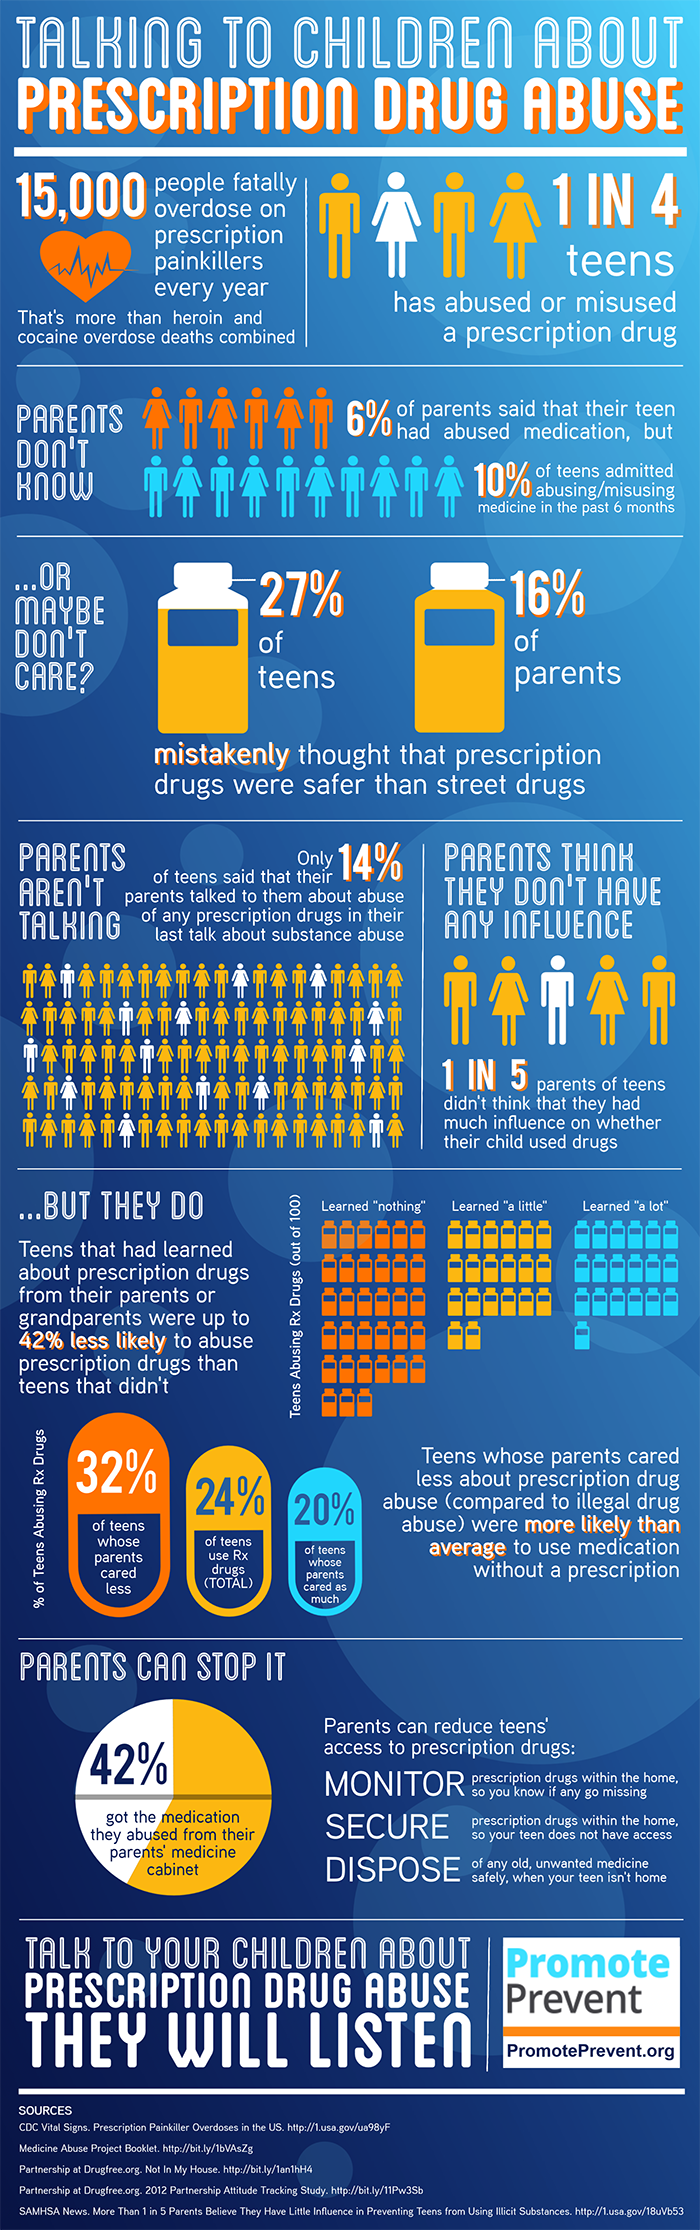 Infographic about parents talking to teens about prescription drug abuse. 